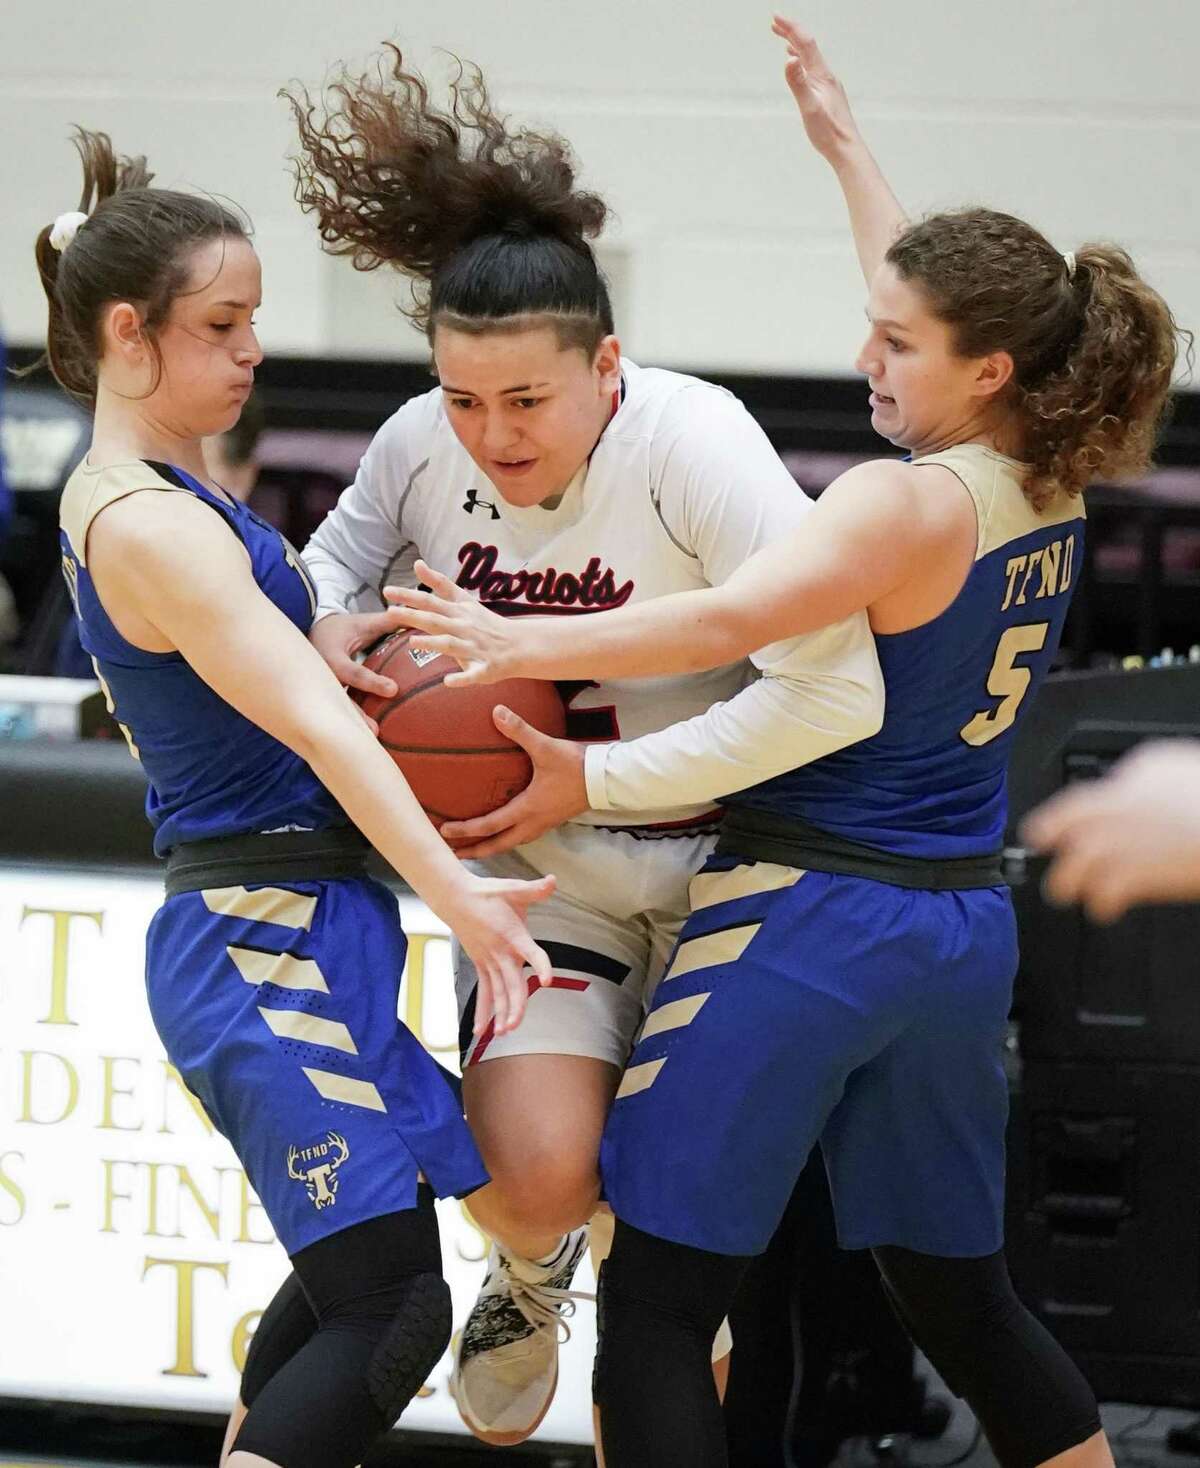 Veterans Memorial's Arianna Aguirre, center, tangles with Tivy's Katie Harmon, right, and Audrey Robertson during a girls high school basketball regional championship game, Saturday, Feb. 23, 2019, in San Antonio. Tivy won 44-34. (Darren Abate/Contributor)